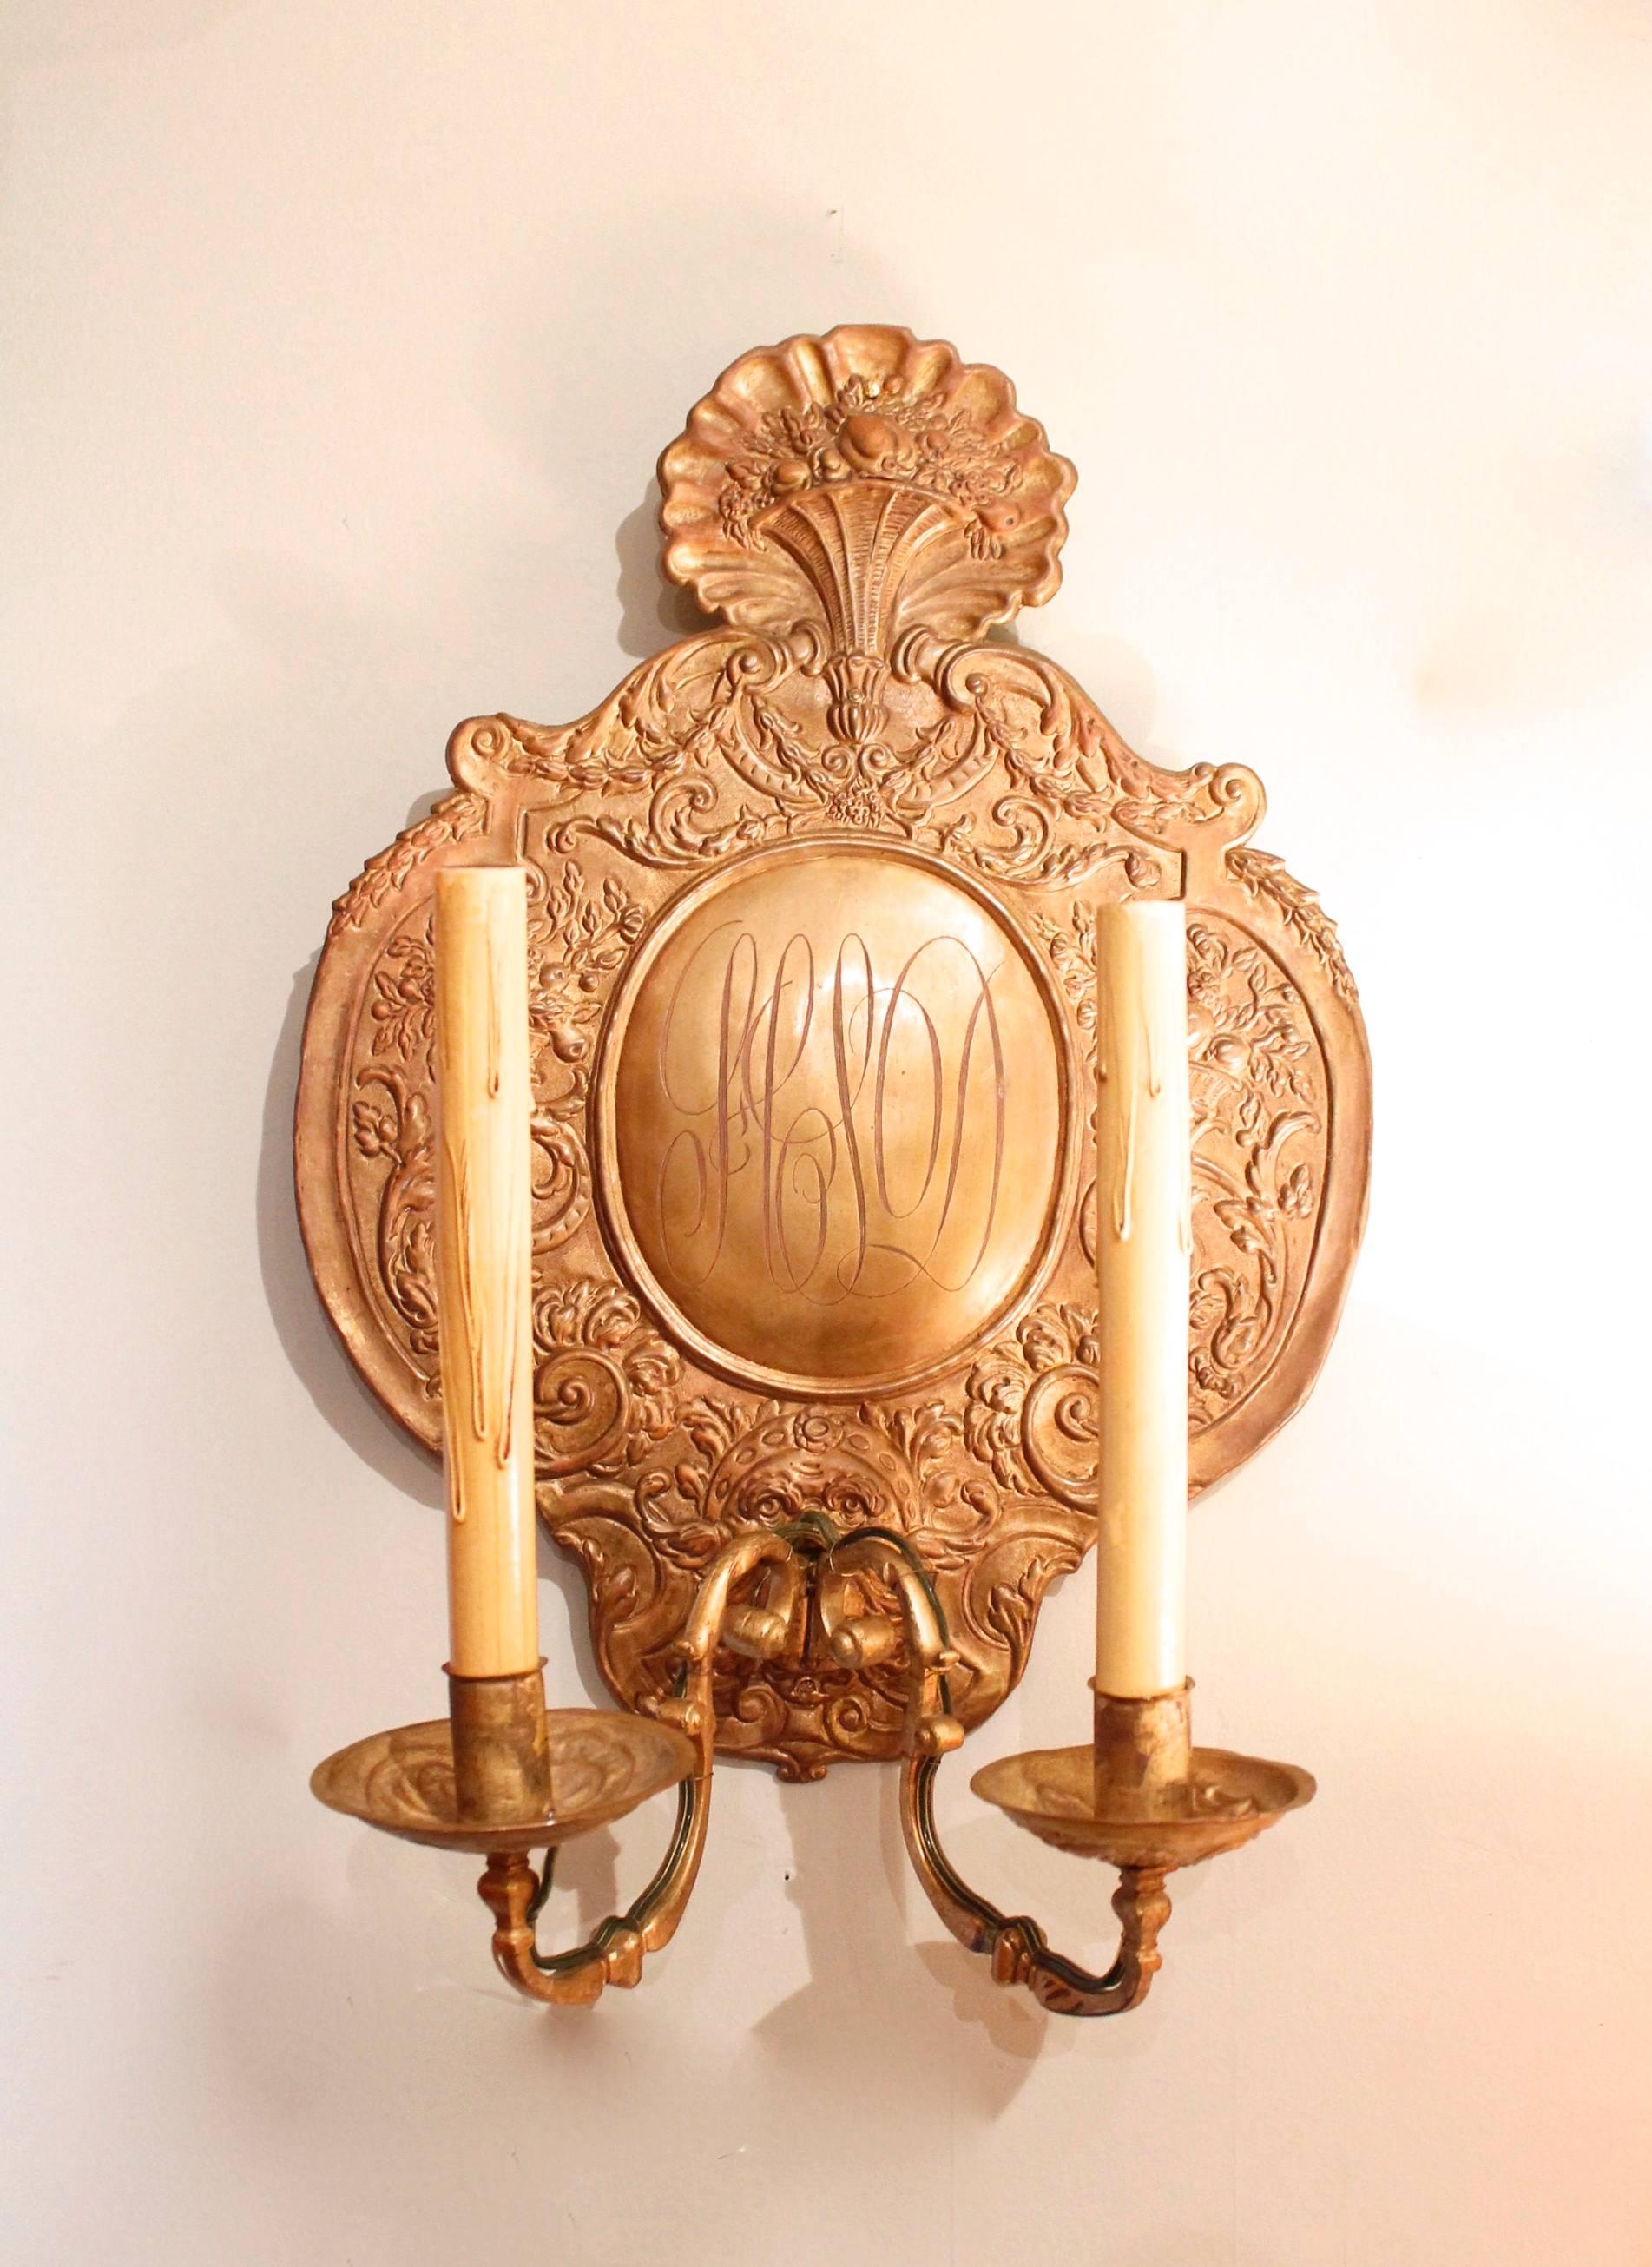 A pair of electrified repoussé brass sconces, embellished with foliate designs around oval center bosses which are engraved with the initials HSD.